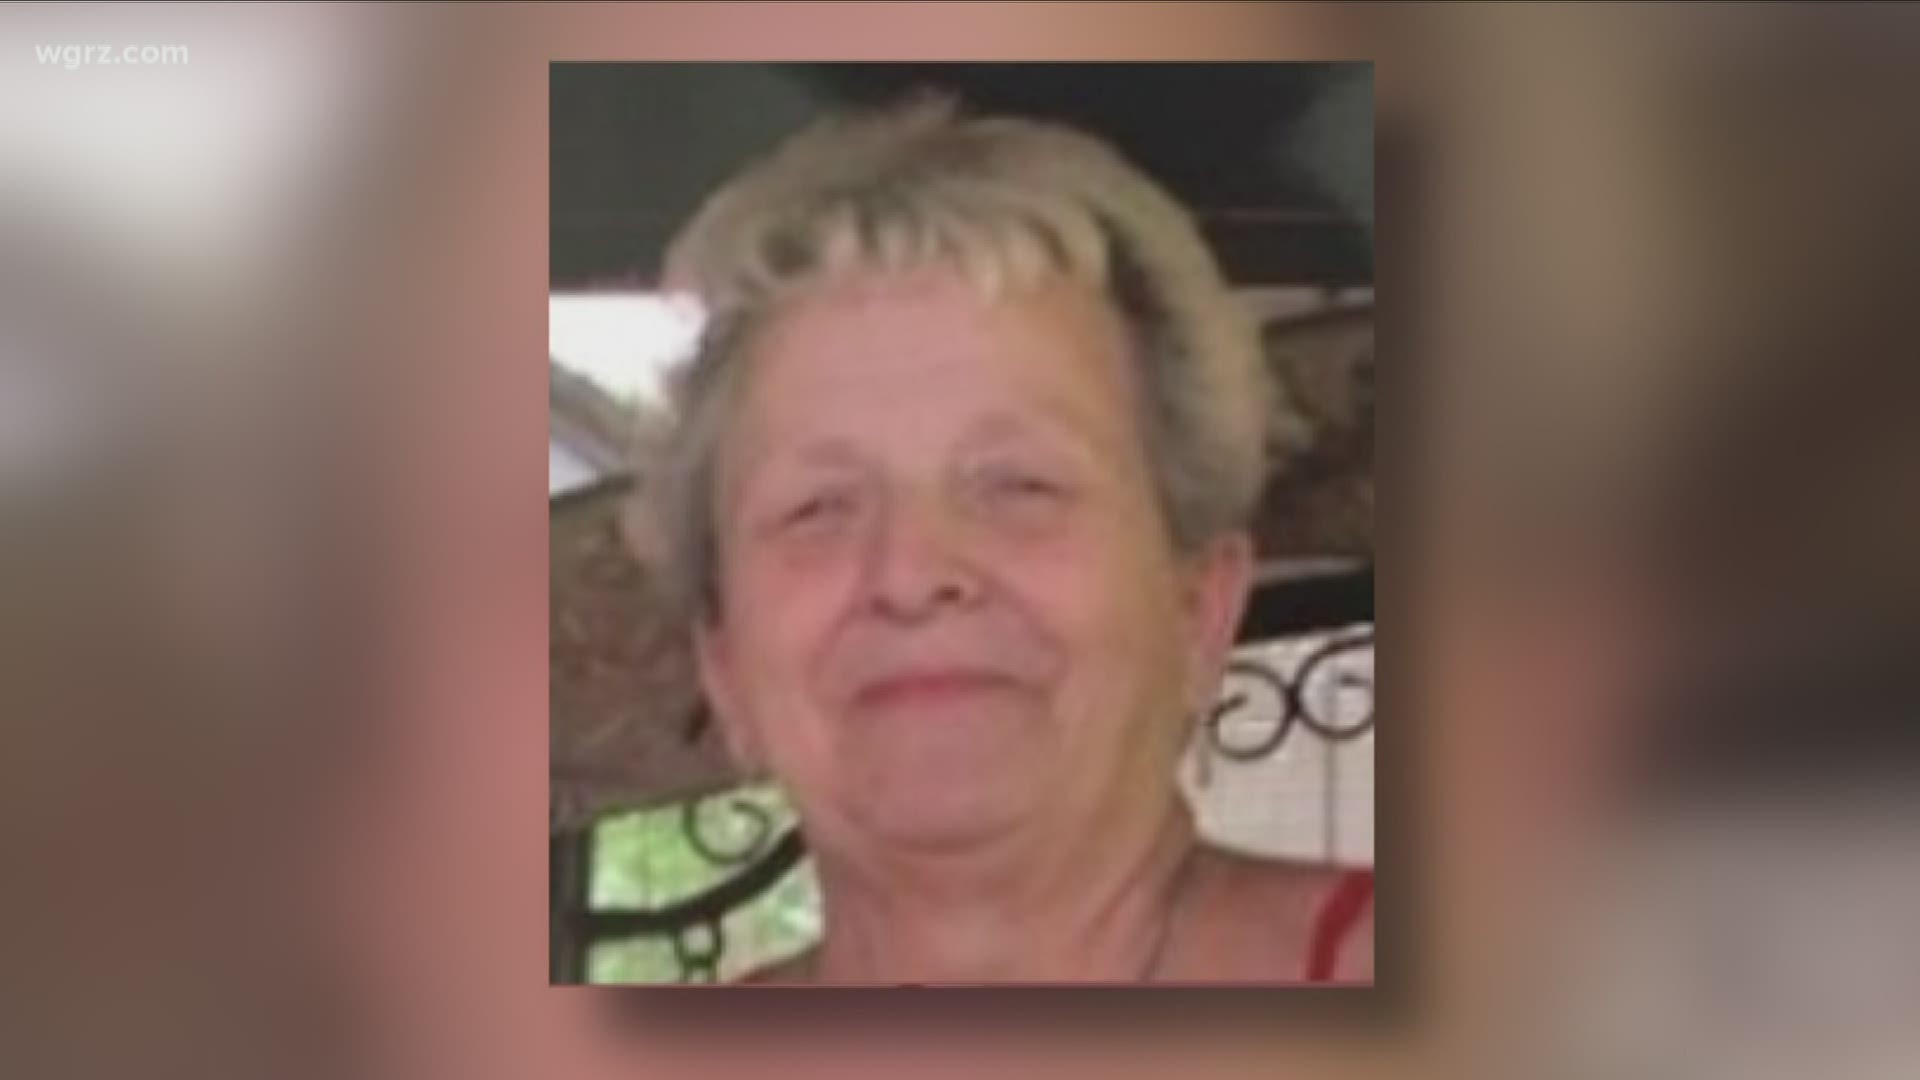 The body of 74-year-old Diana Chase was found in a wooded area in the town of Harmony